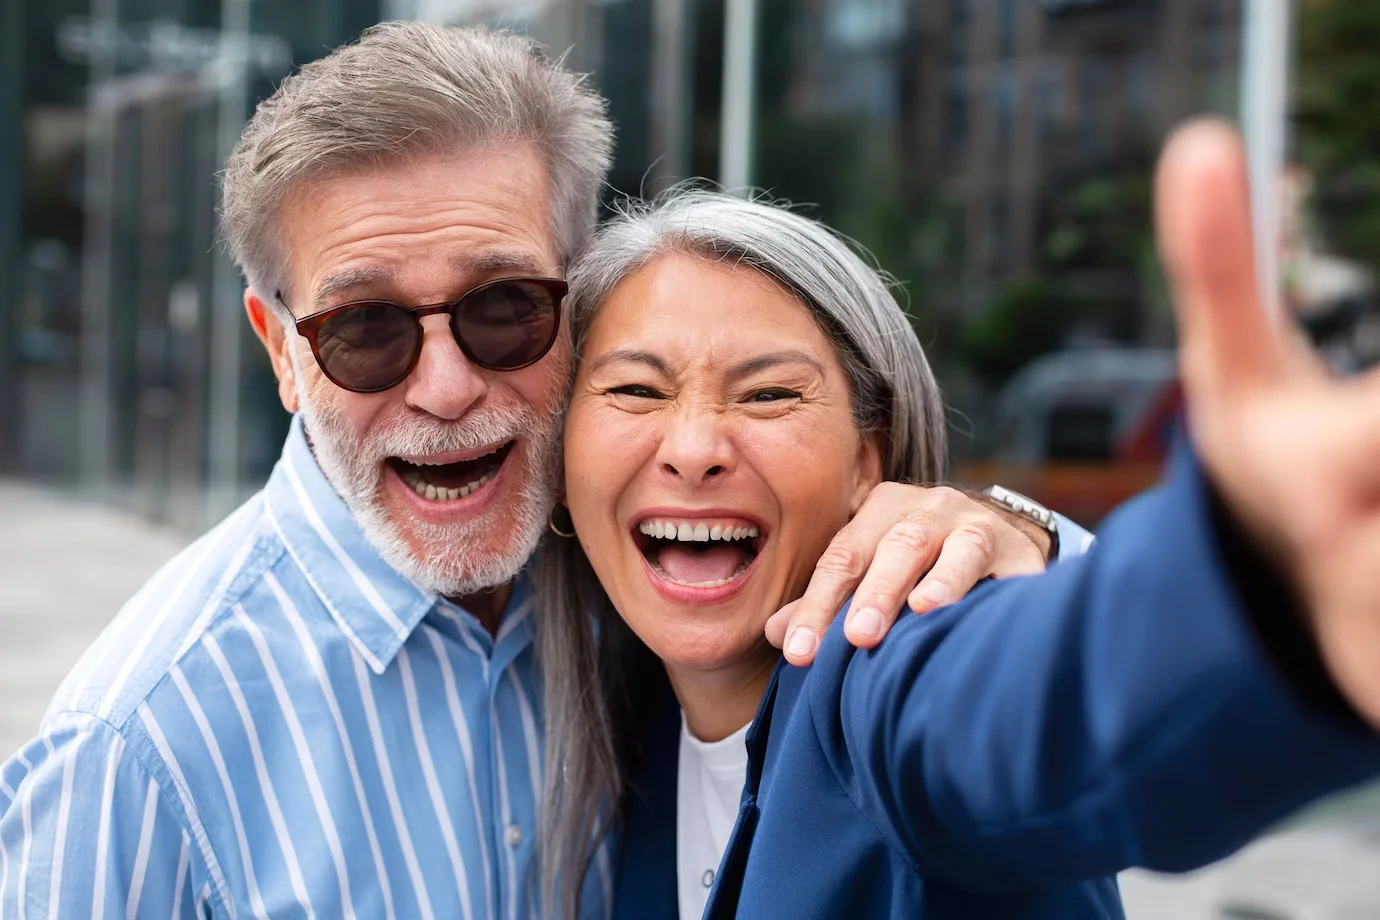 husband and wife going to lumi family dentistry in Sachse, TX 75048 for dentures